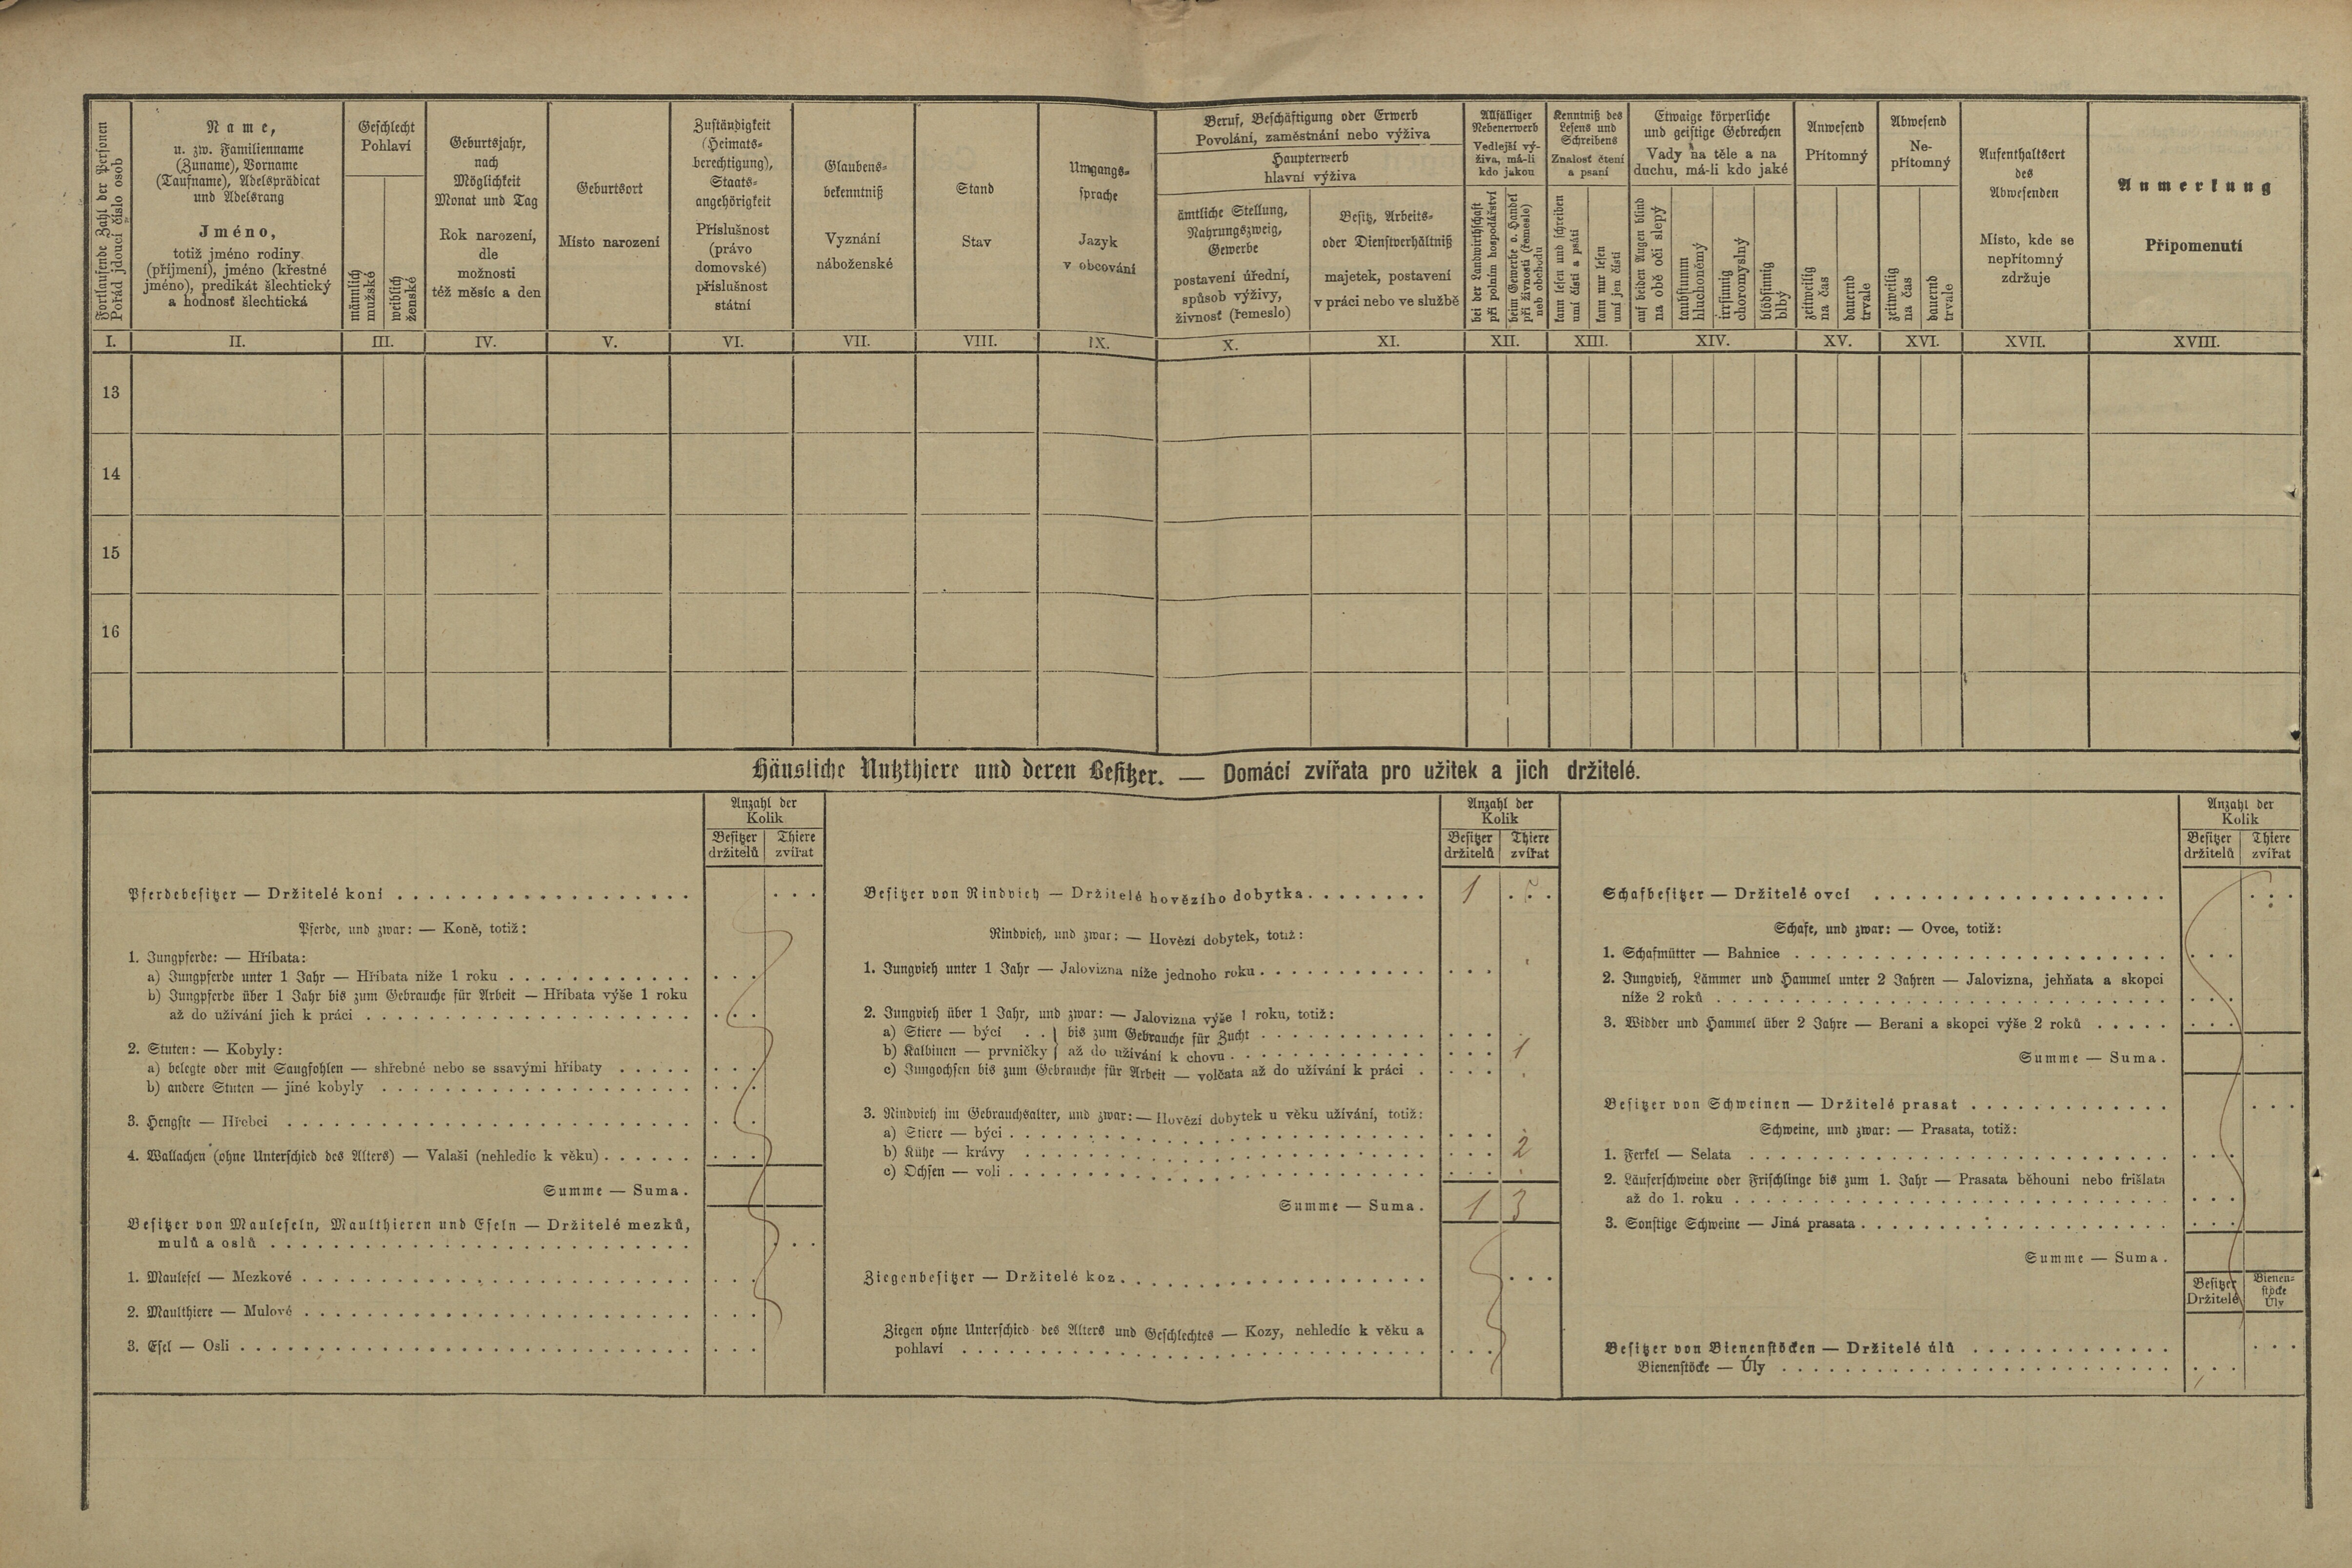 2. soap-pj_00302_census-1880-srby-cp016_0020